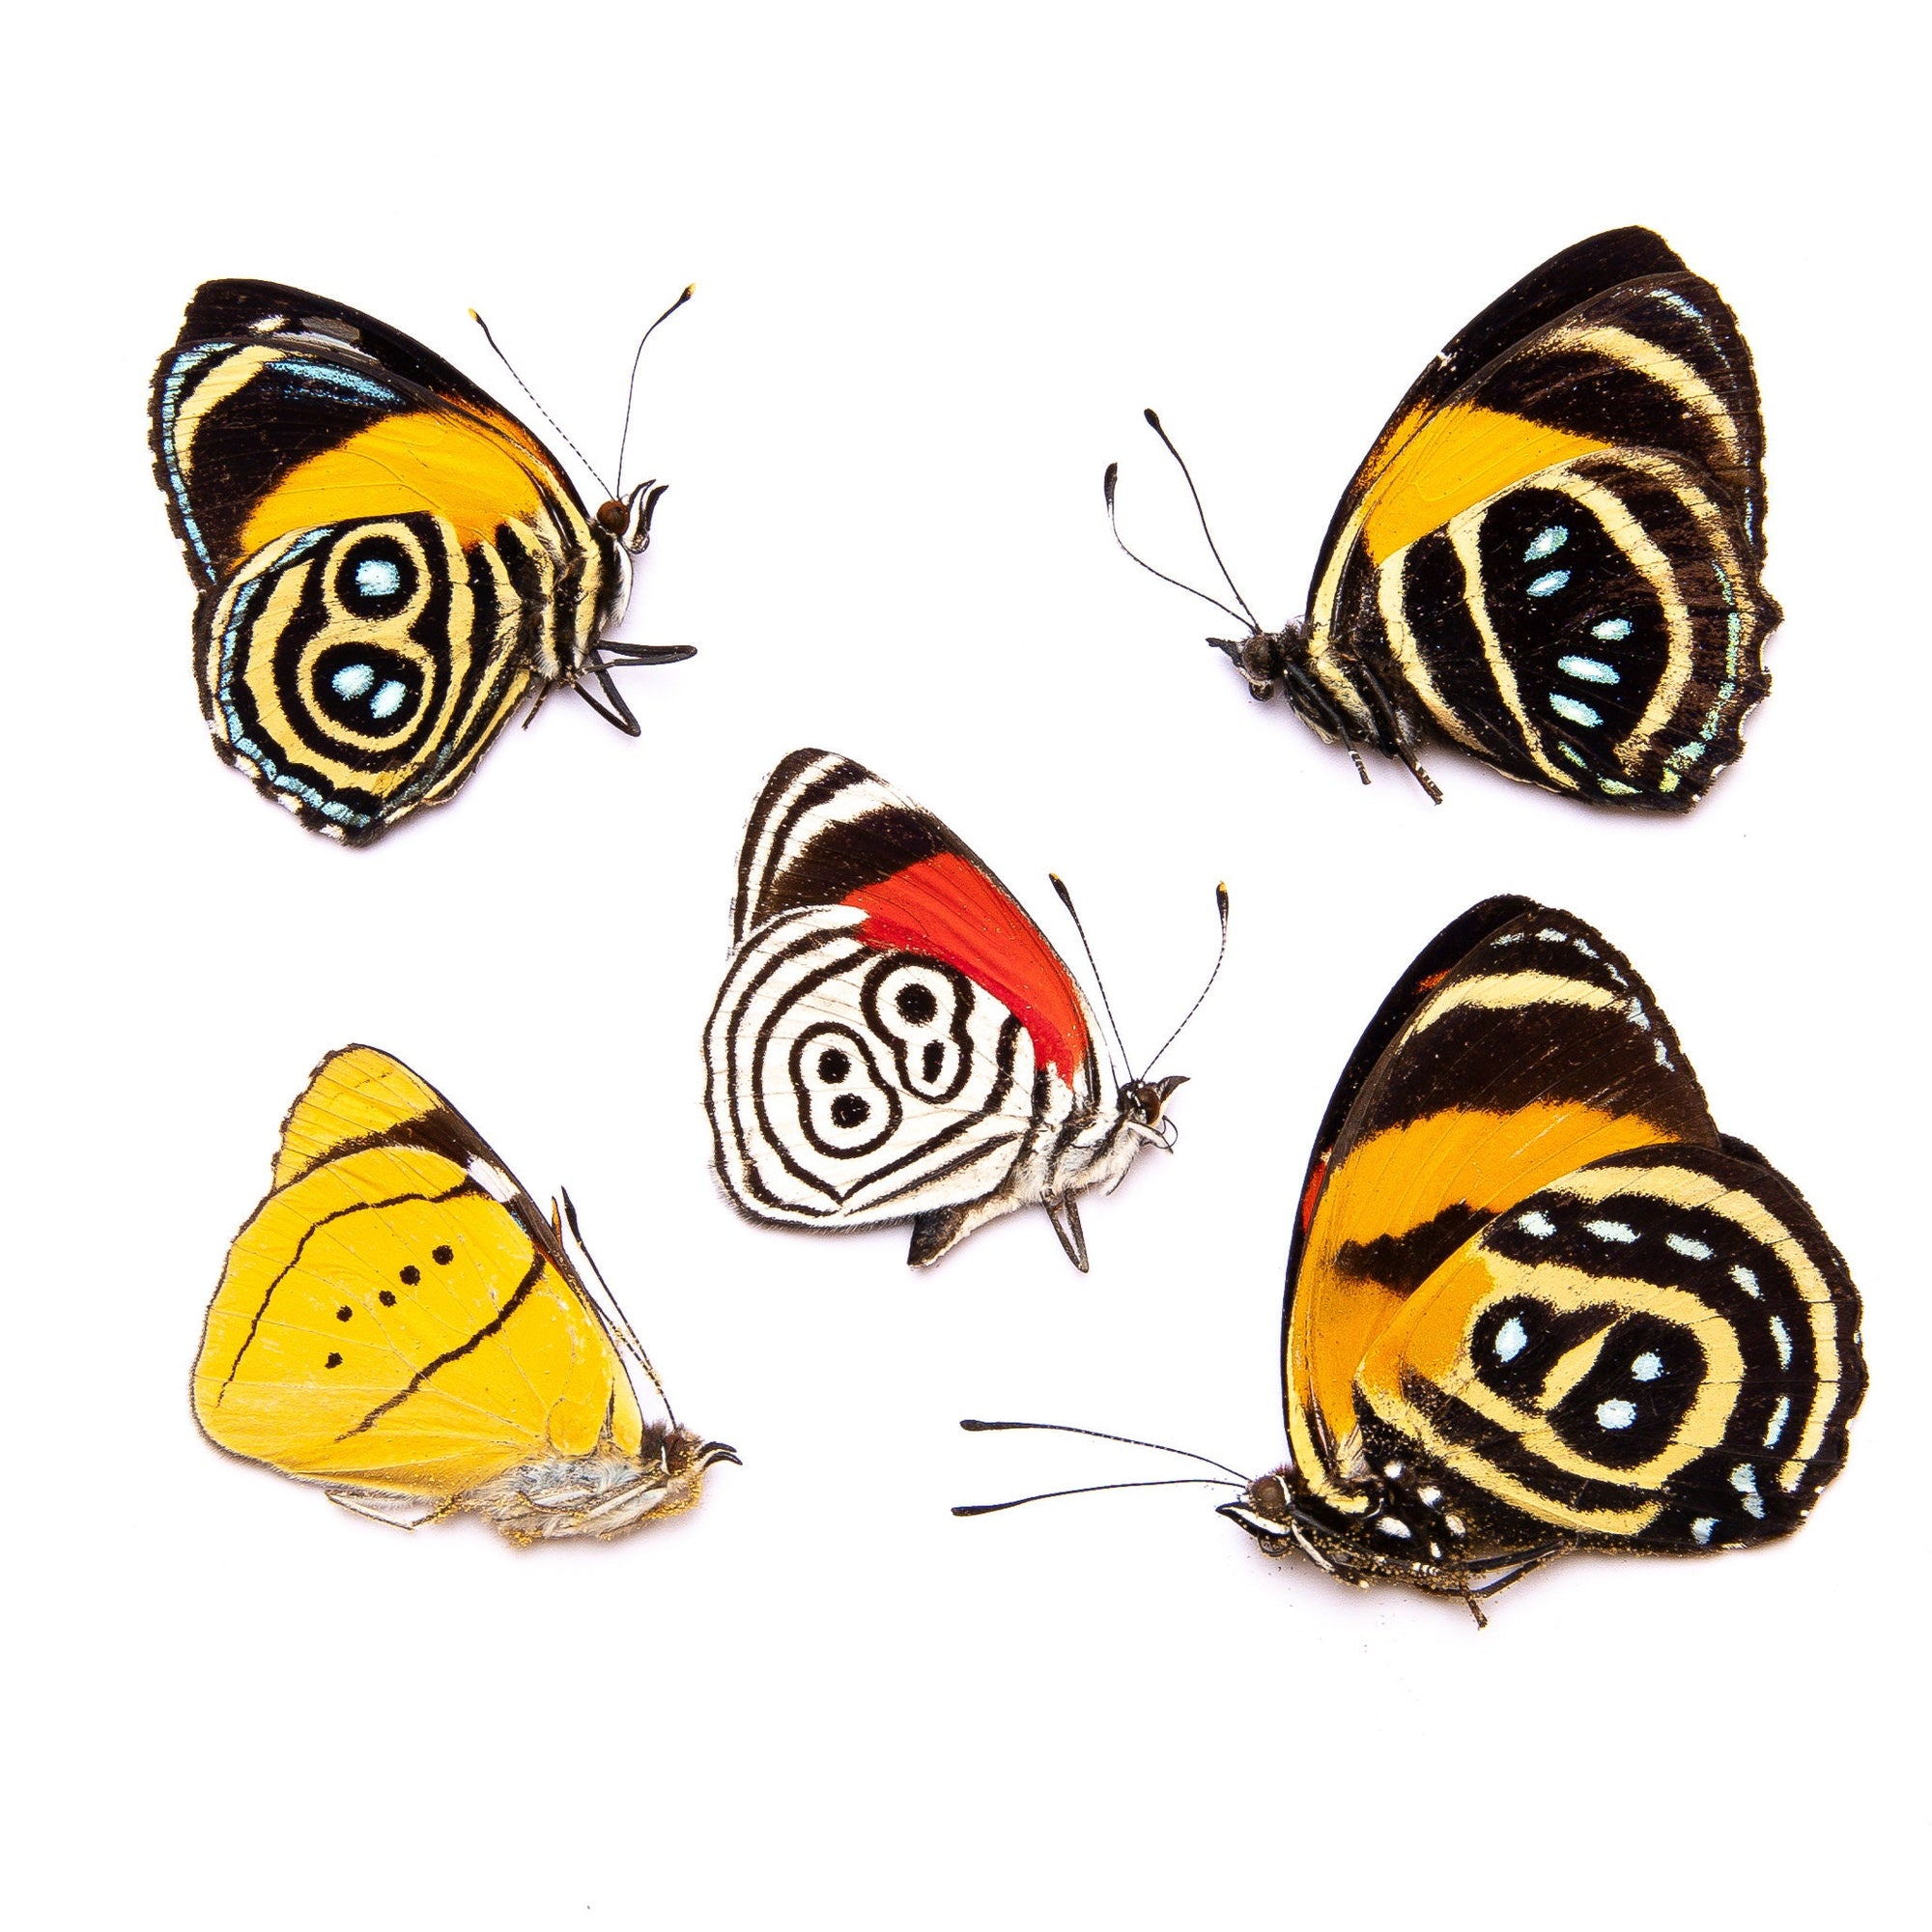 FIVE (5) Peruvian NumberWing Butterflies A1/A1- Mixed Assorted Callicore, Diaethria, Perisama, Free Shipping